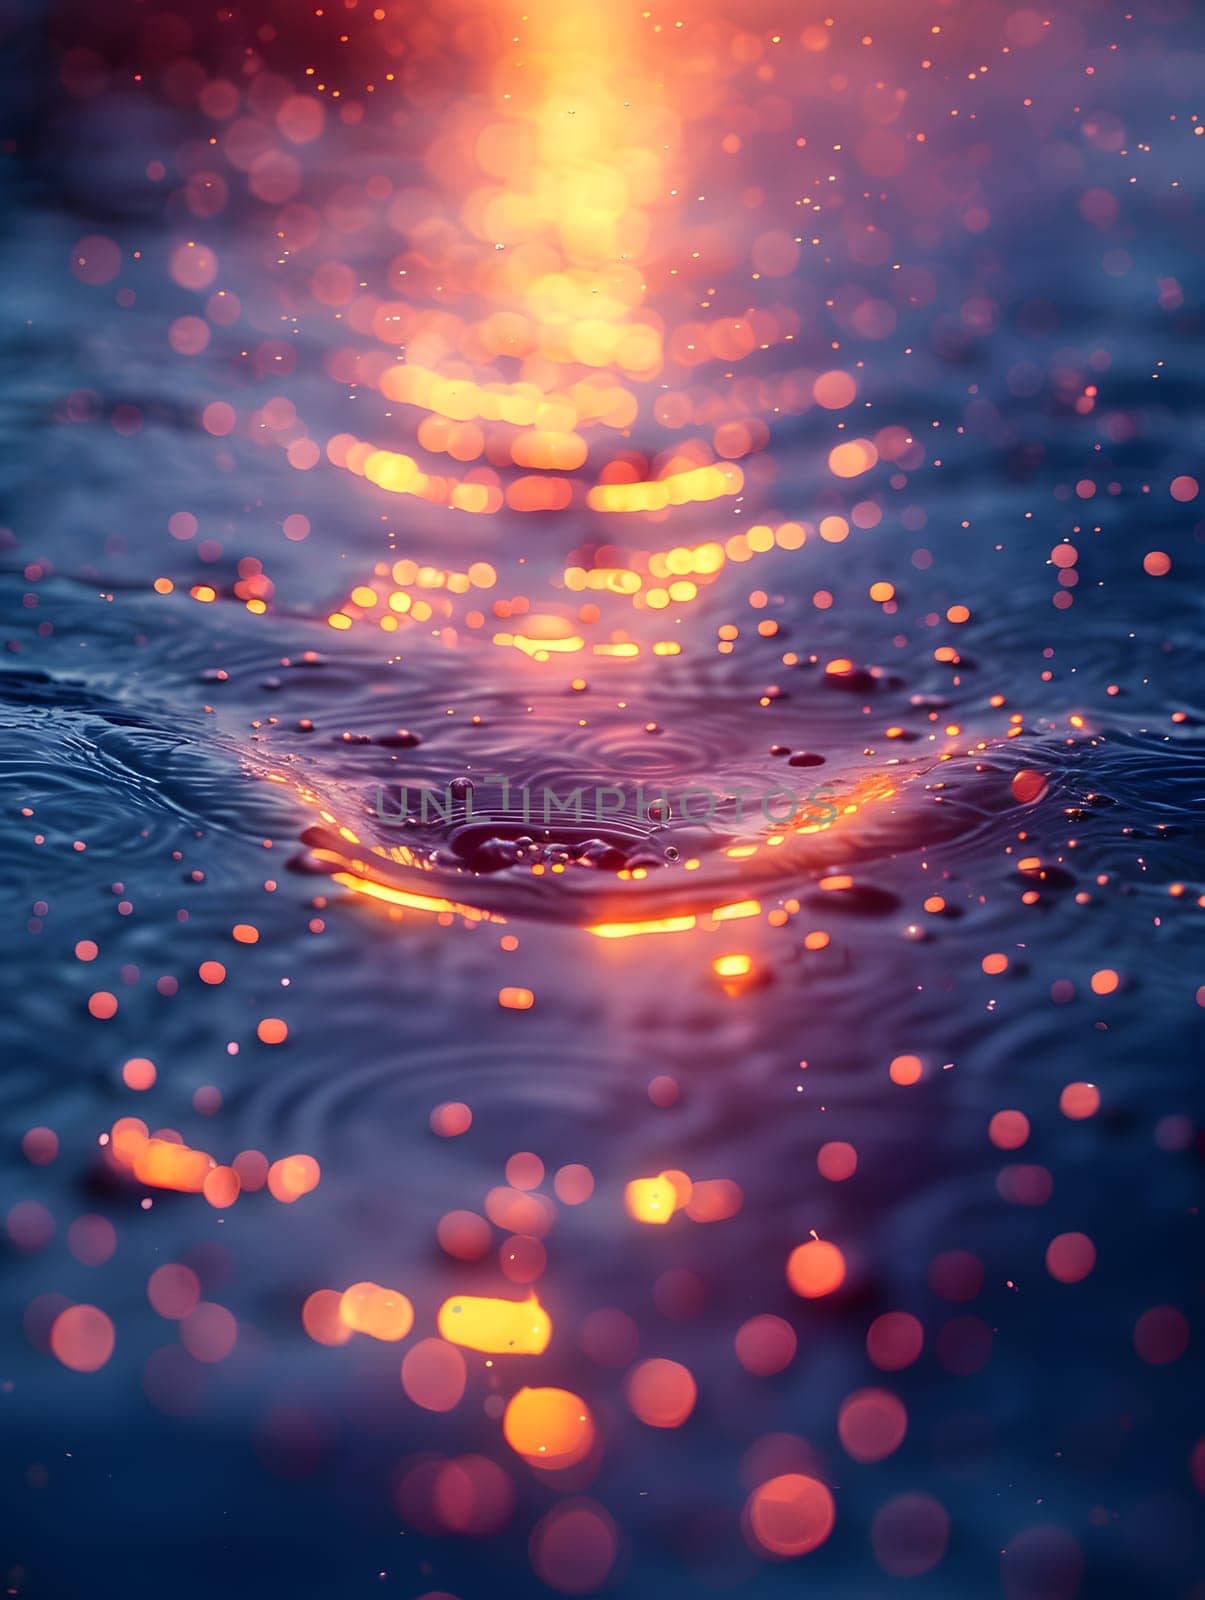 A close up of liquid water reflecting the orange hues of the sunset, creating an atmospheric phenomenon known as afterglow in the dusk sky